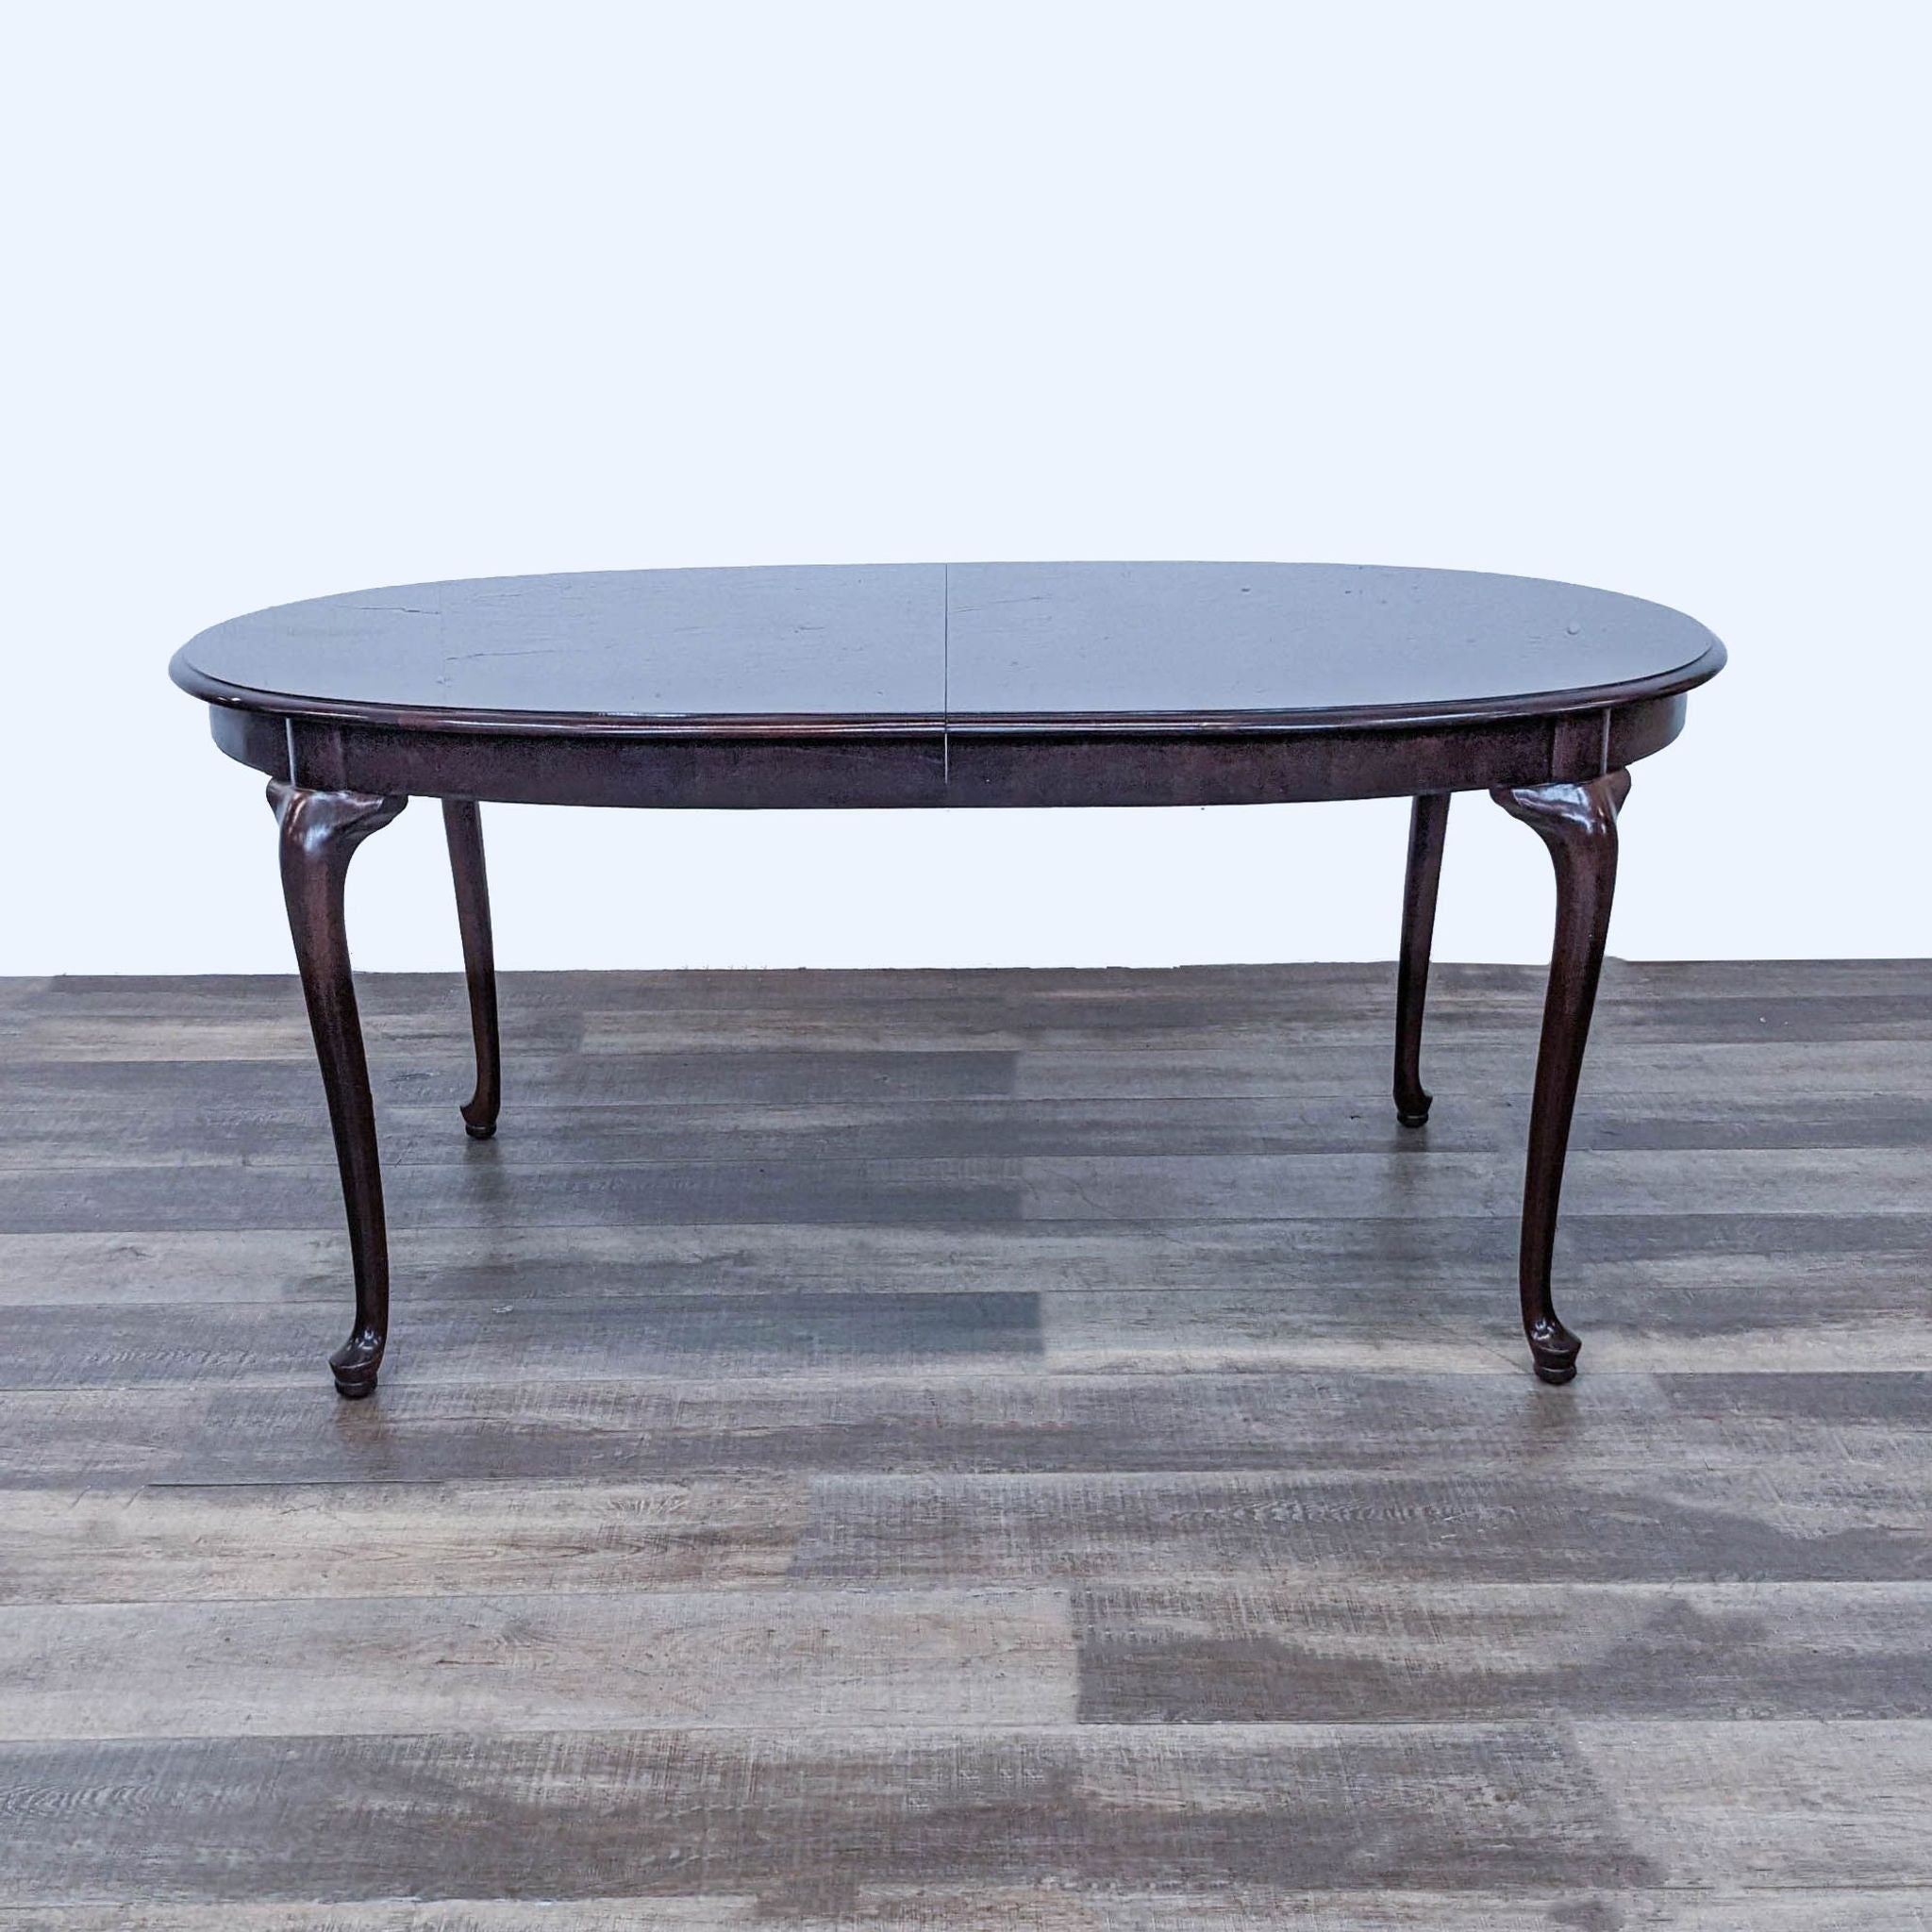 Elegant dark wood Ethan Allen extendable dining table from a 7-piece set, without chairs, on a hardwood floor.